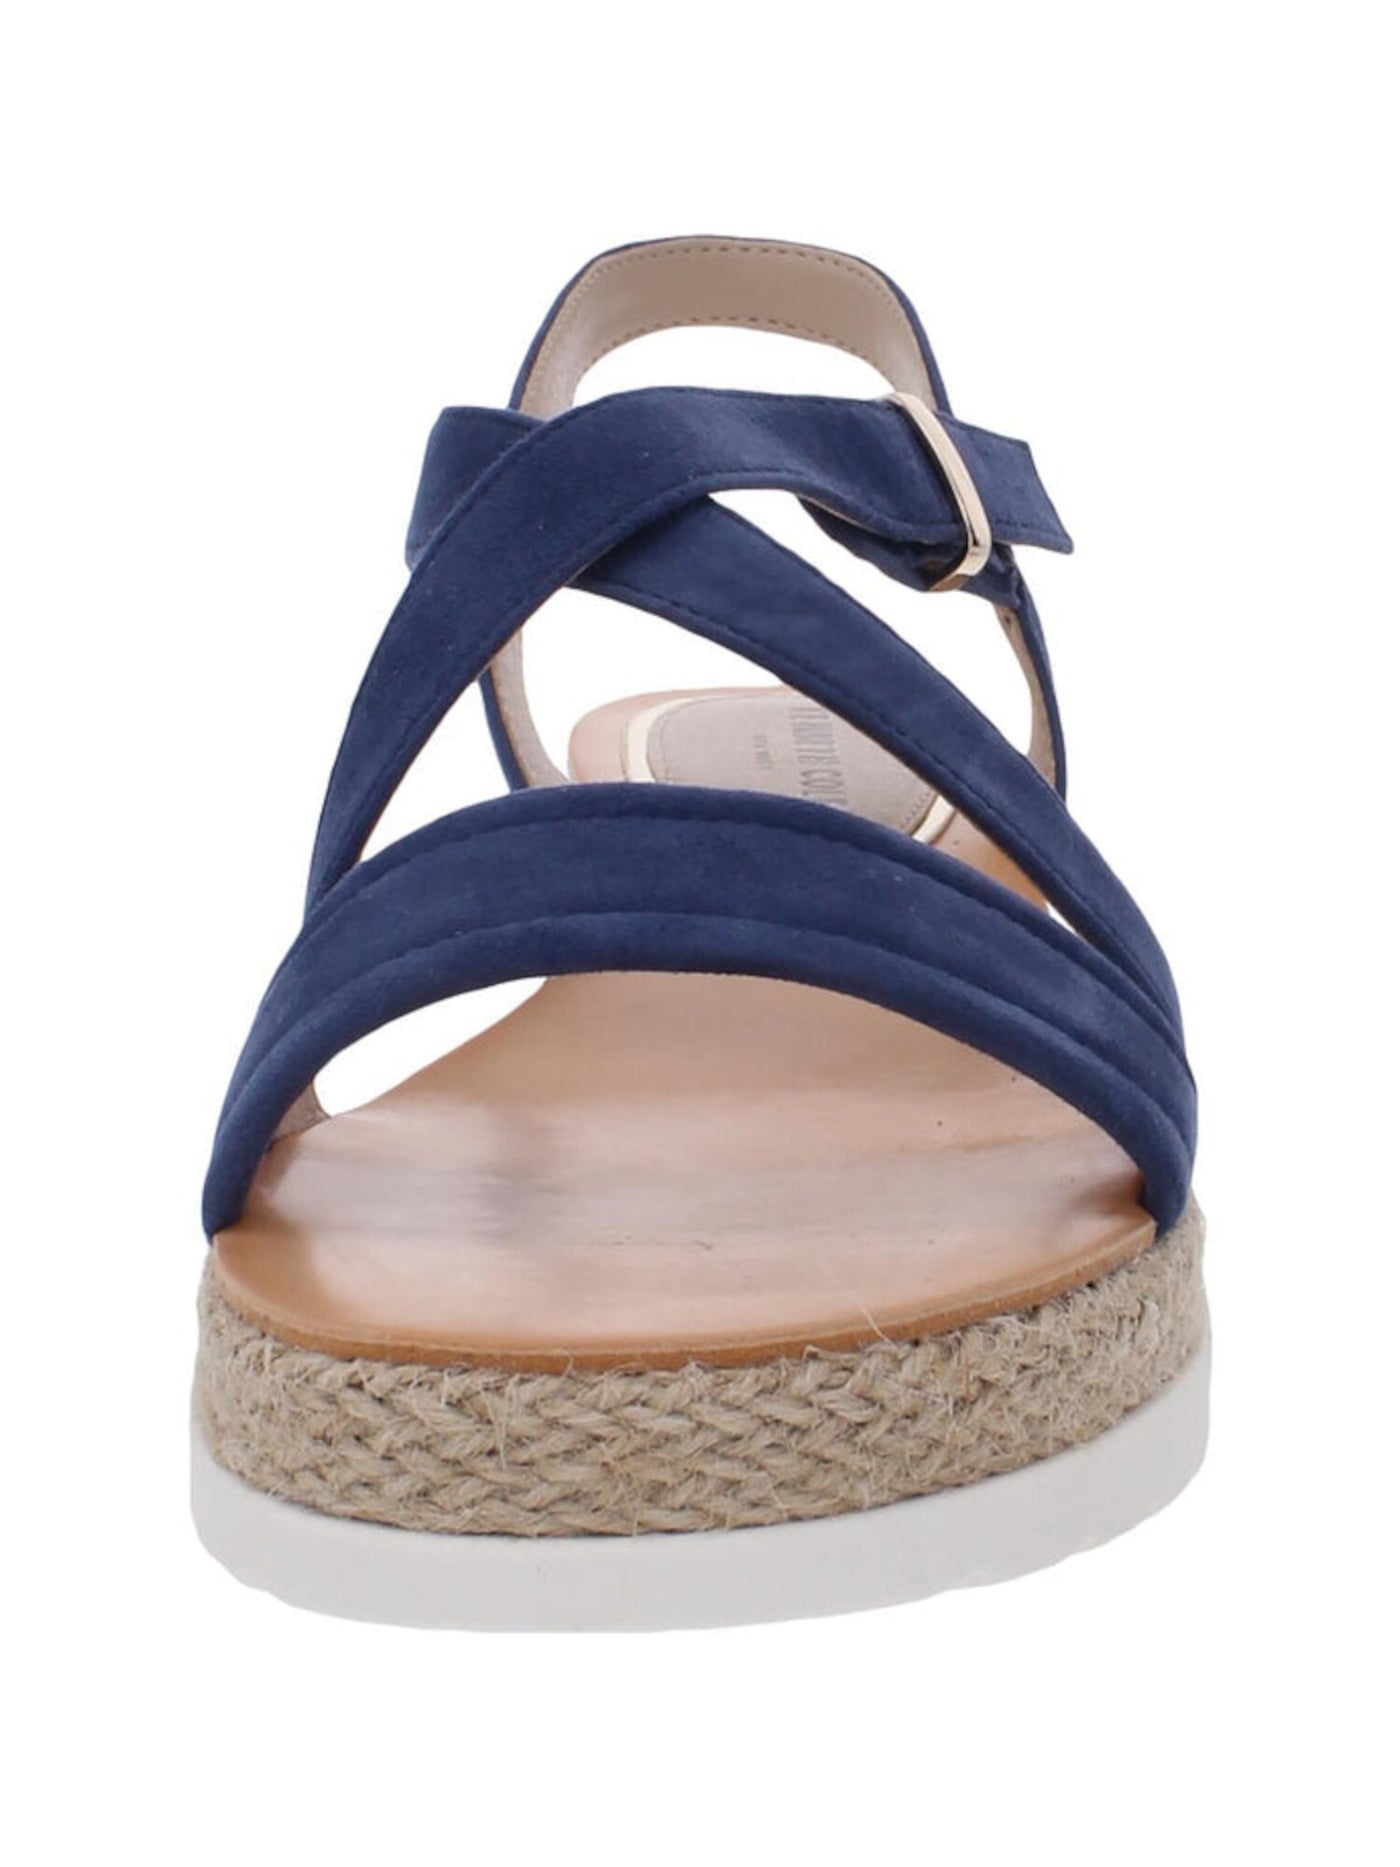 KENNETH COLE NEW YORK Womens Blue 1" Platform Jute Wrapped Crisscross Straps Buckle Accent Cushioned Adjustable Jules Round Toe Wedge Slip On Leather Slingback Sandal 5.5 M